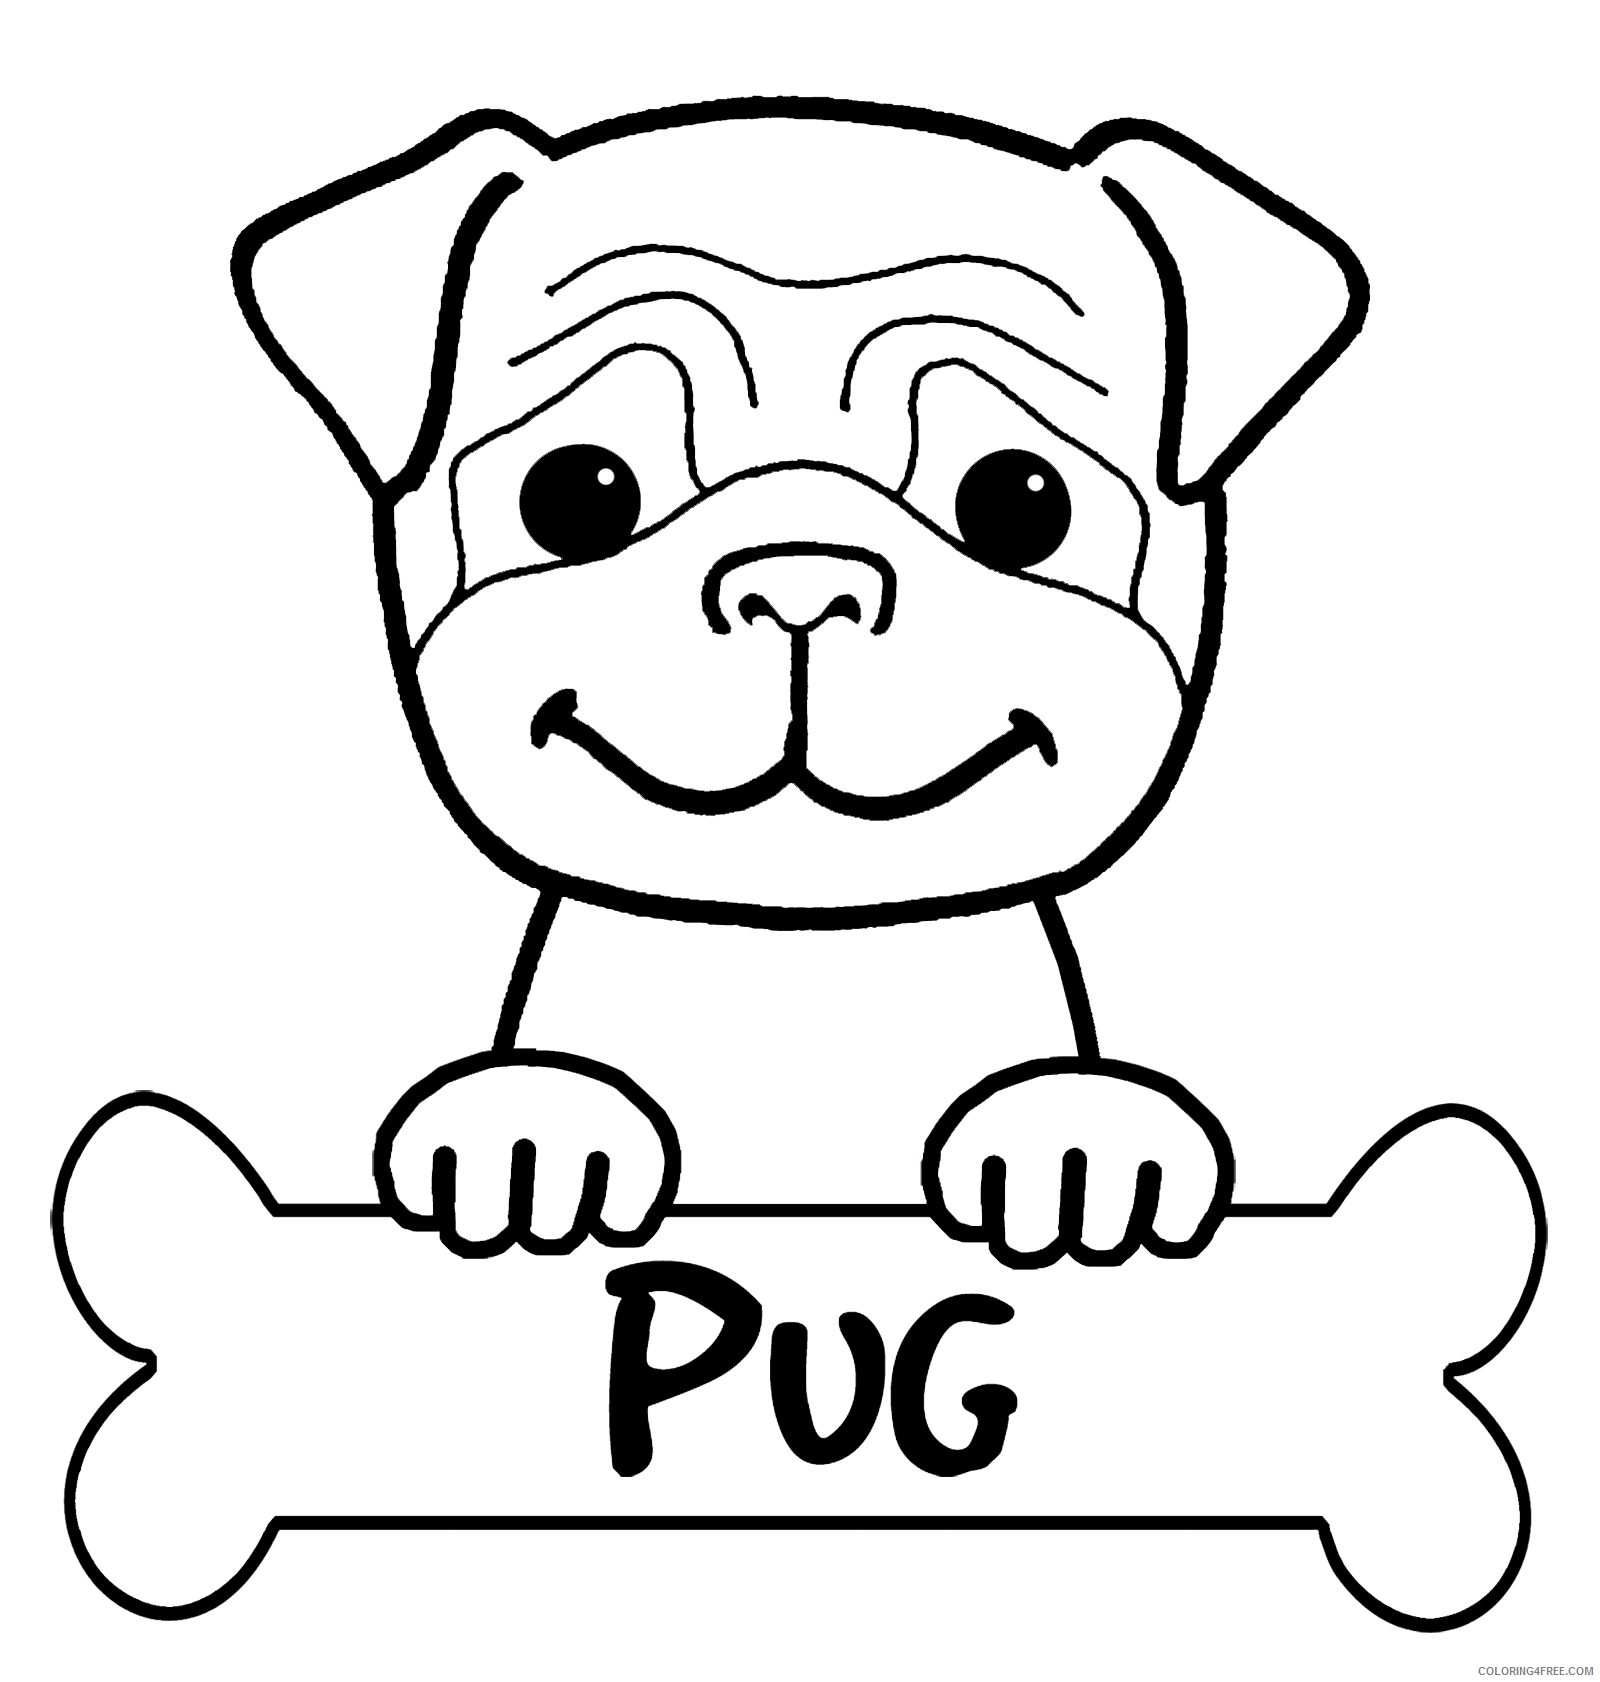 Pug Coloring Pages Animal Printable Sheets Cute Free Pug 2021 4044 Coloring4free